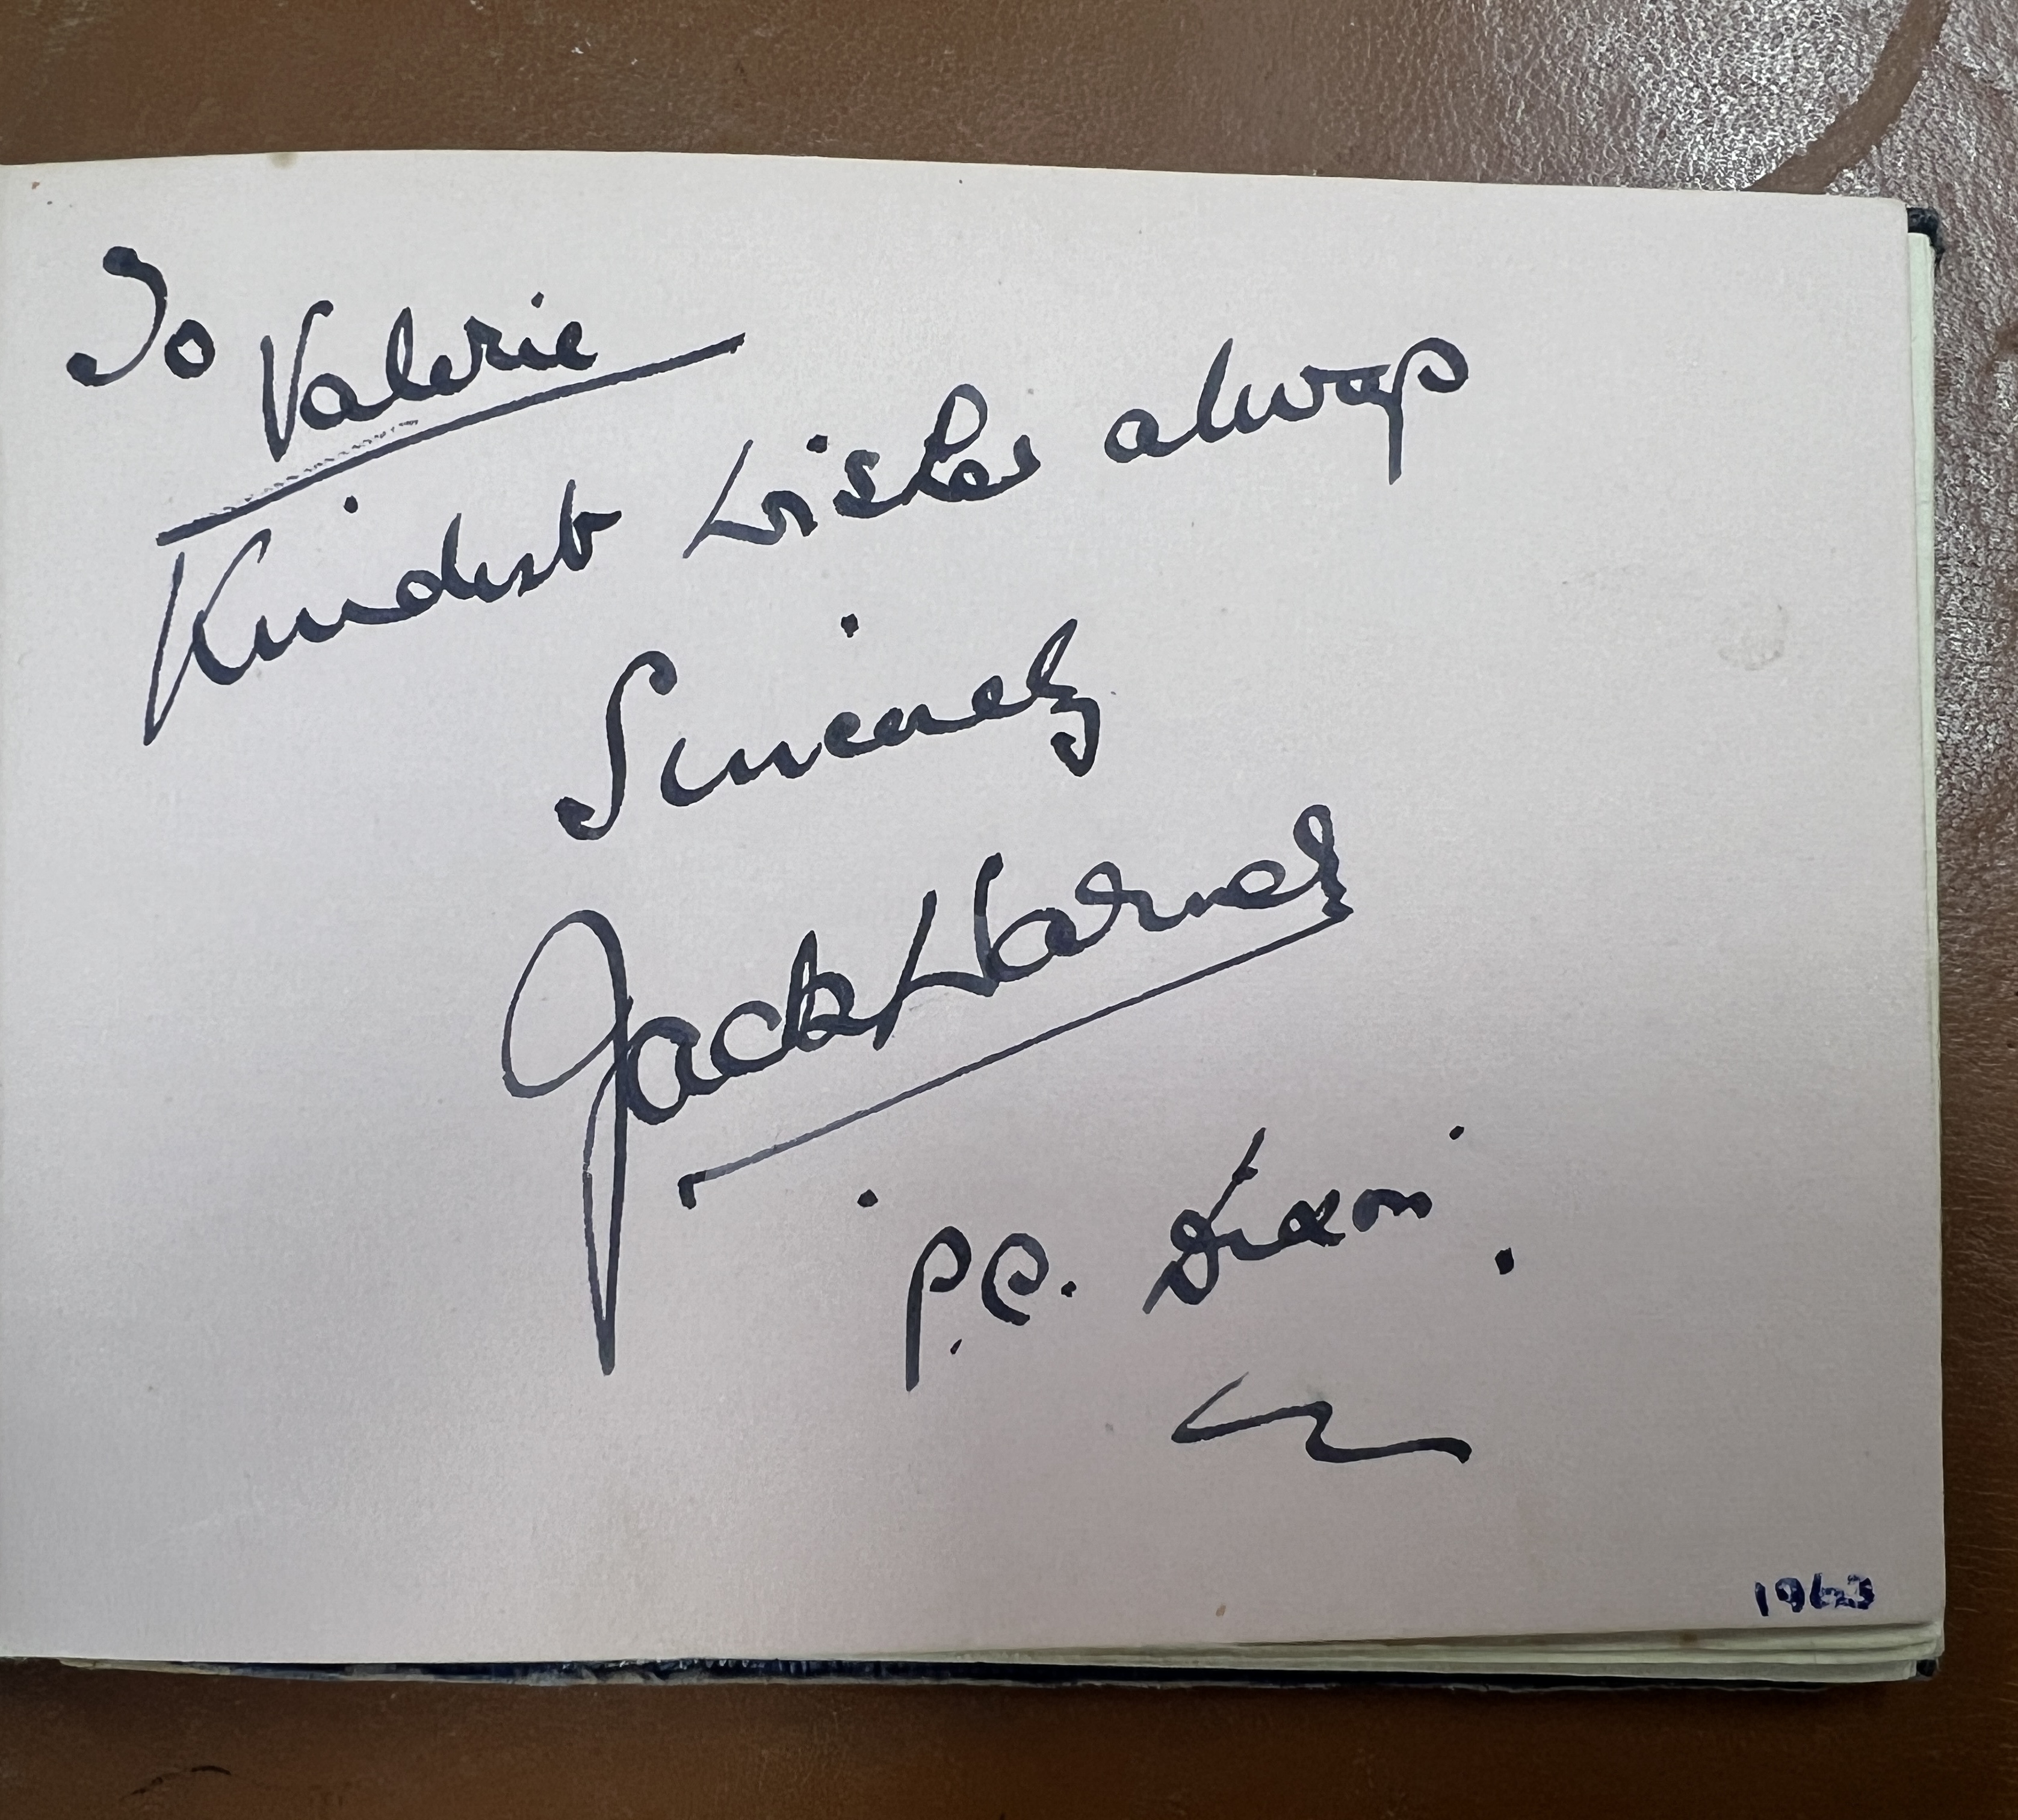 A 1960's autograph album containing autographs of various celebrities including Cliff Richard, - Image 13 of 37